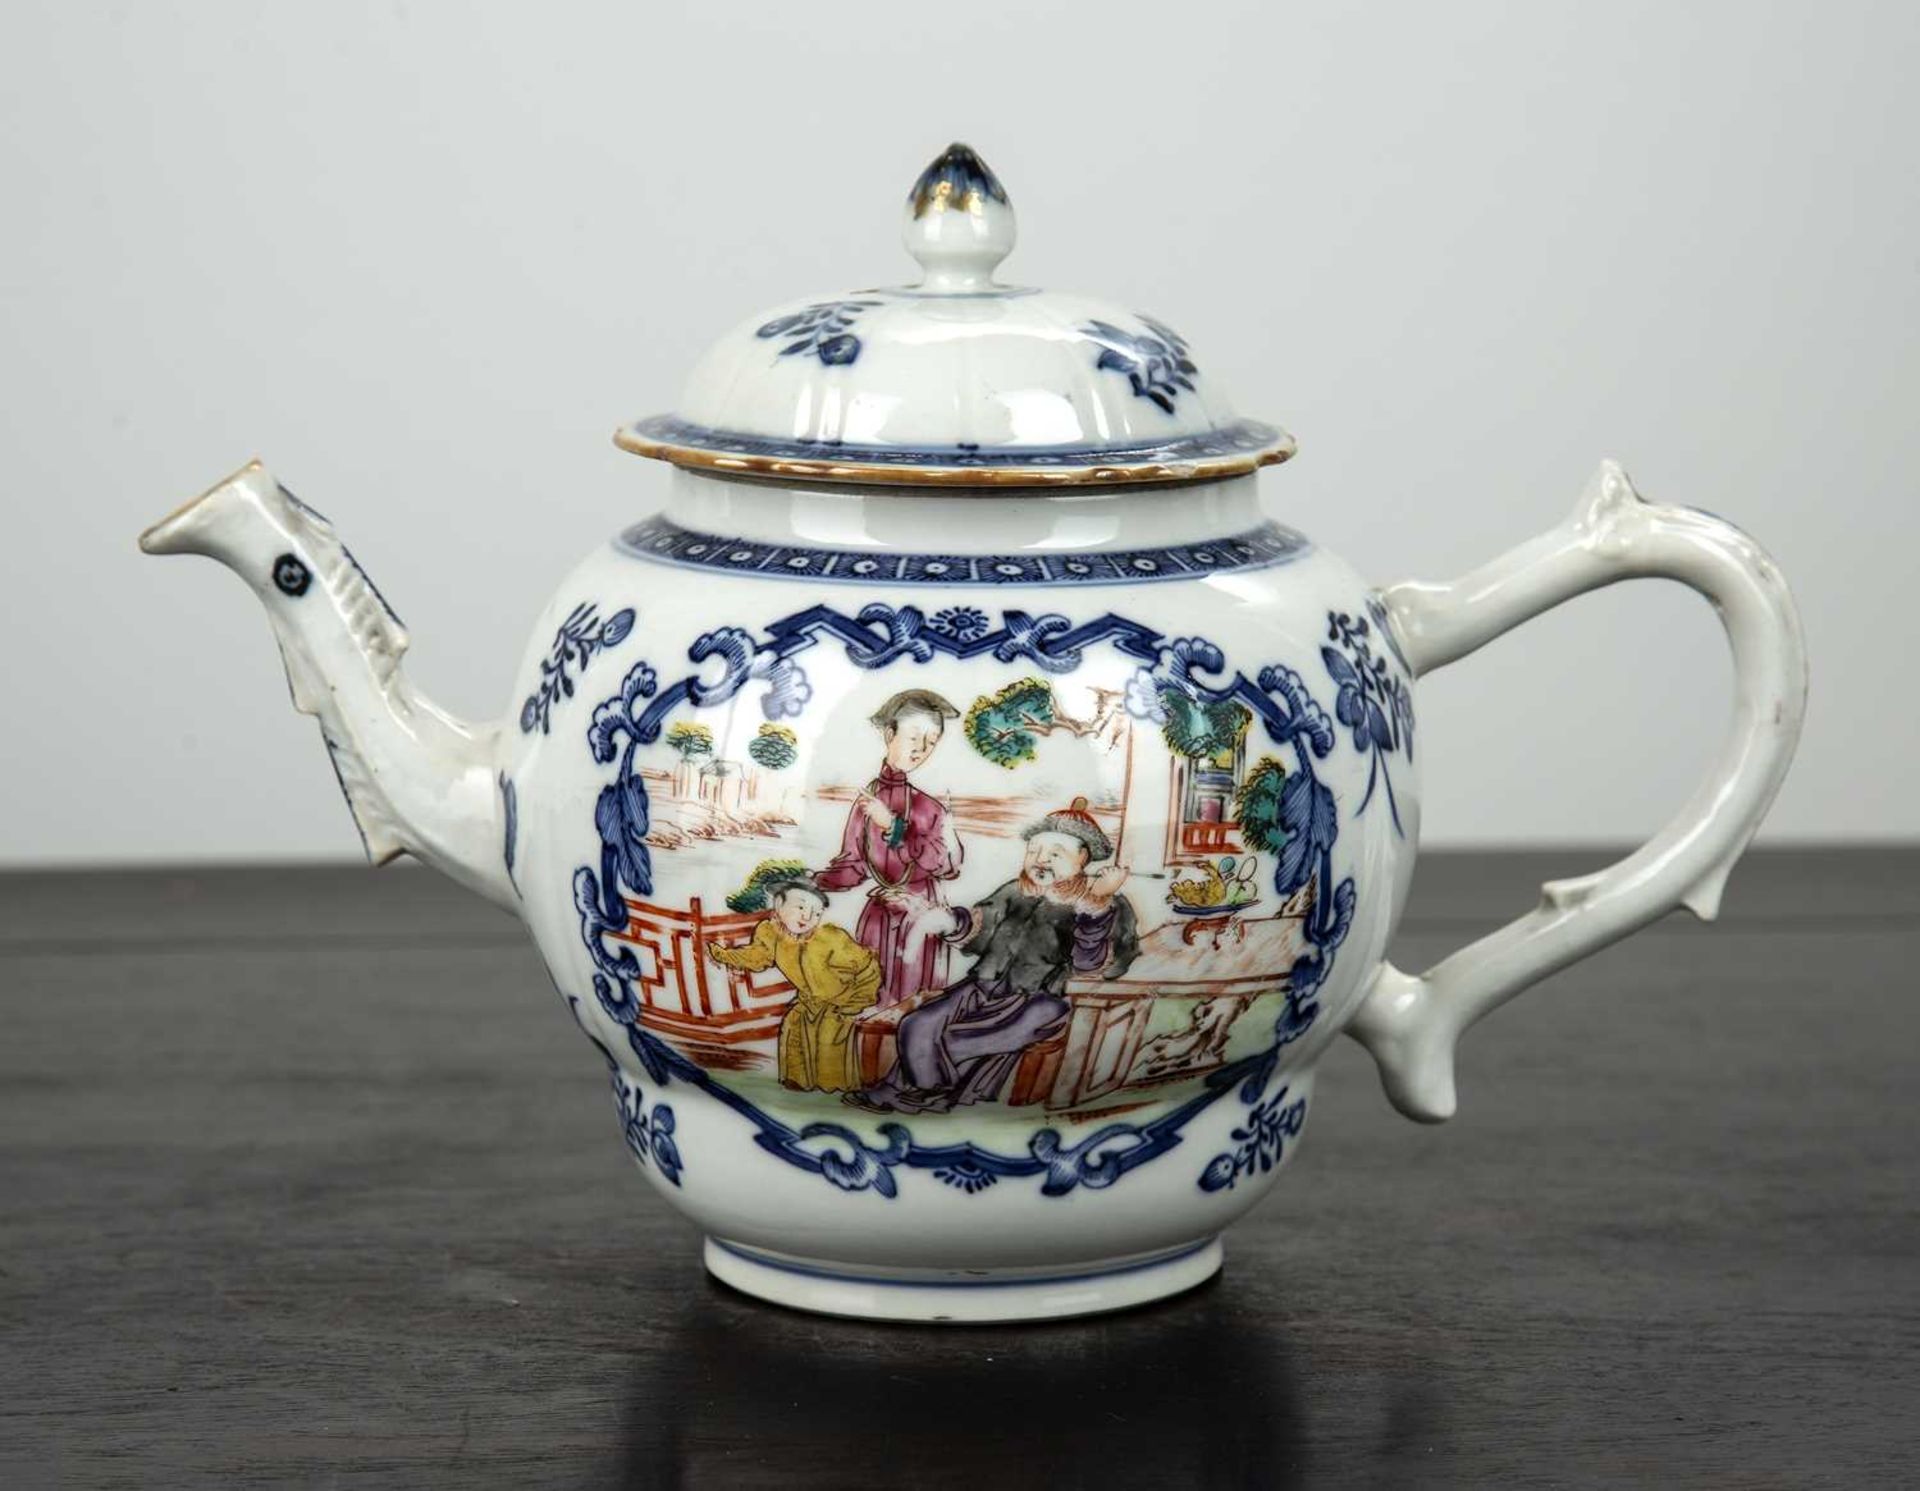 Mandarin porcelain teapot Chinese, 18th Century painted with blue framed panels of figures, 22.5cm x